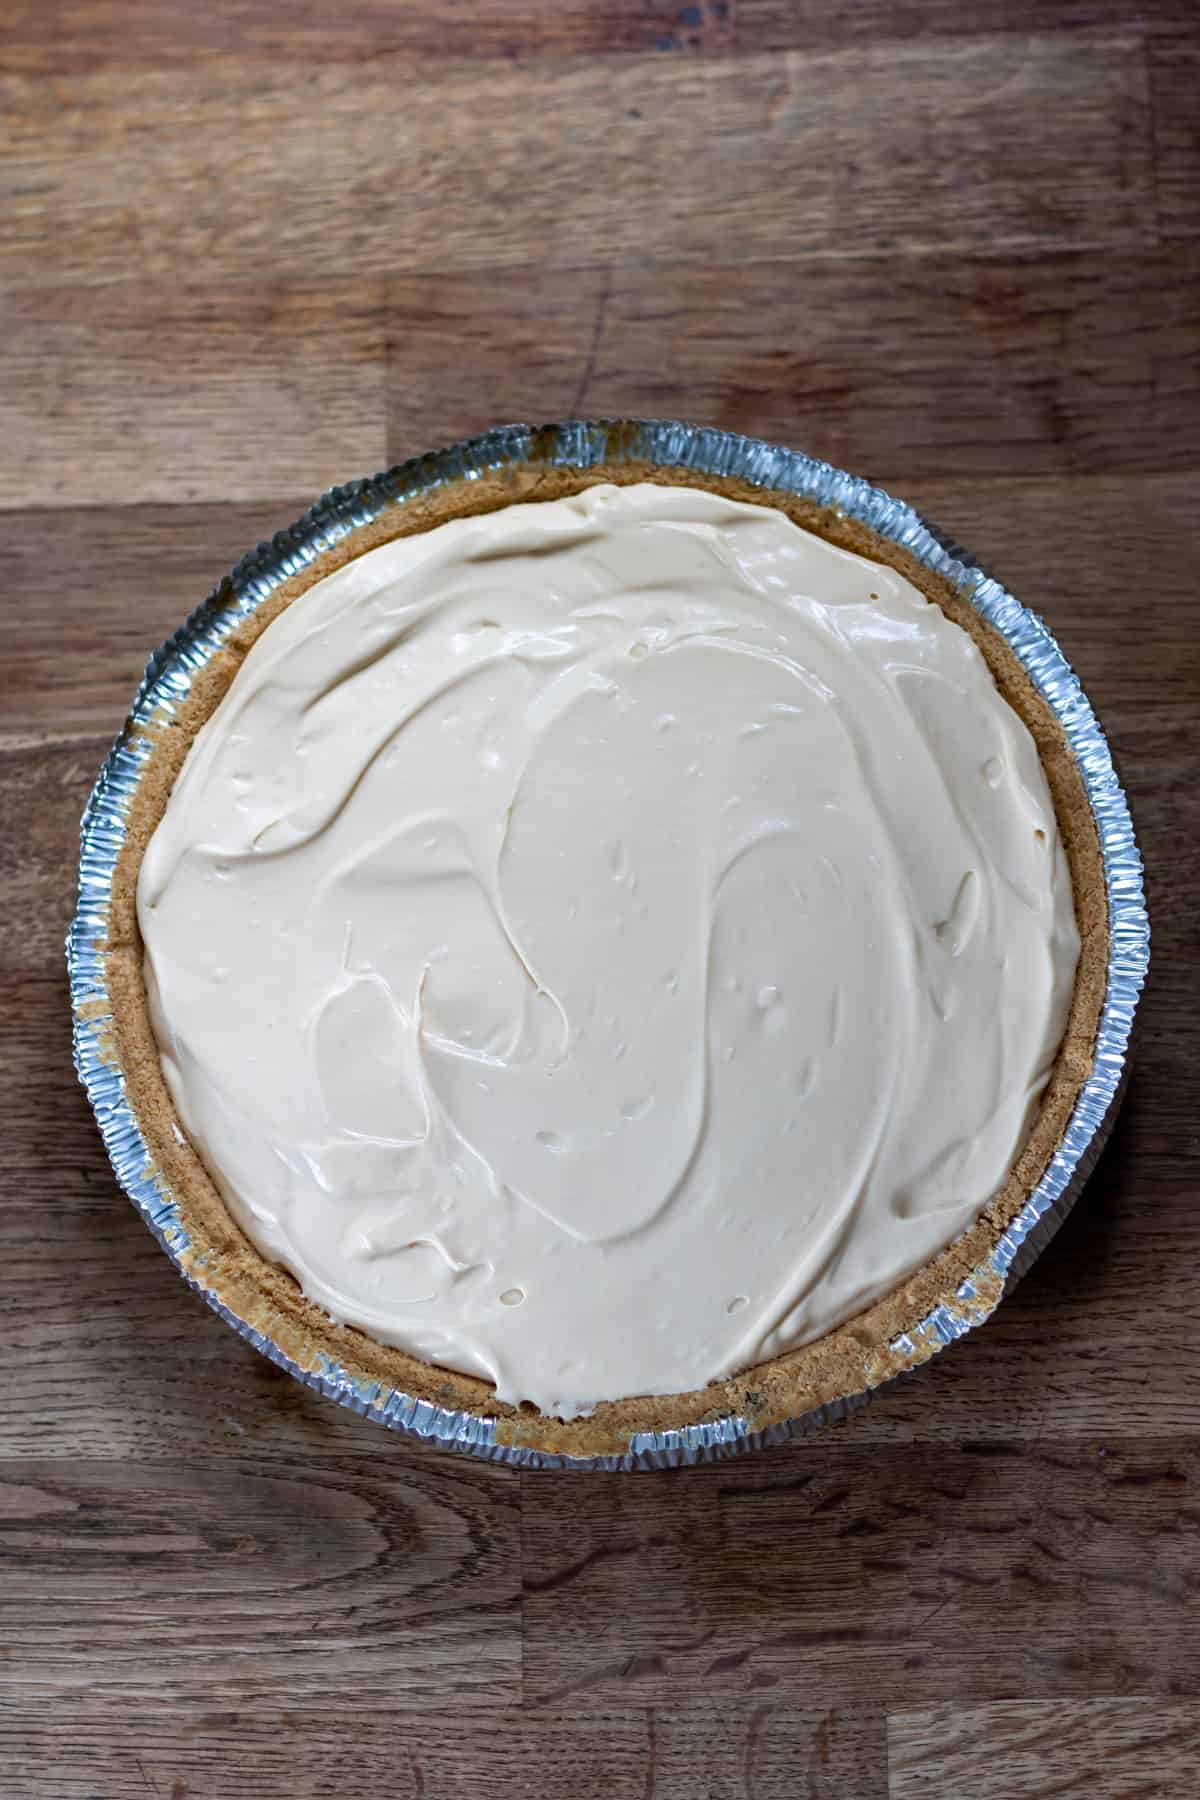 Cheesecake filling poured into pie crust.